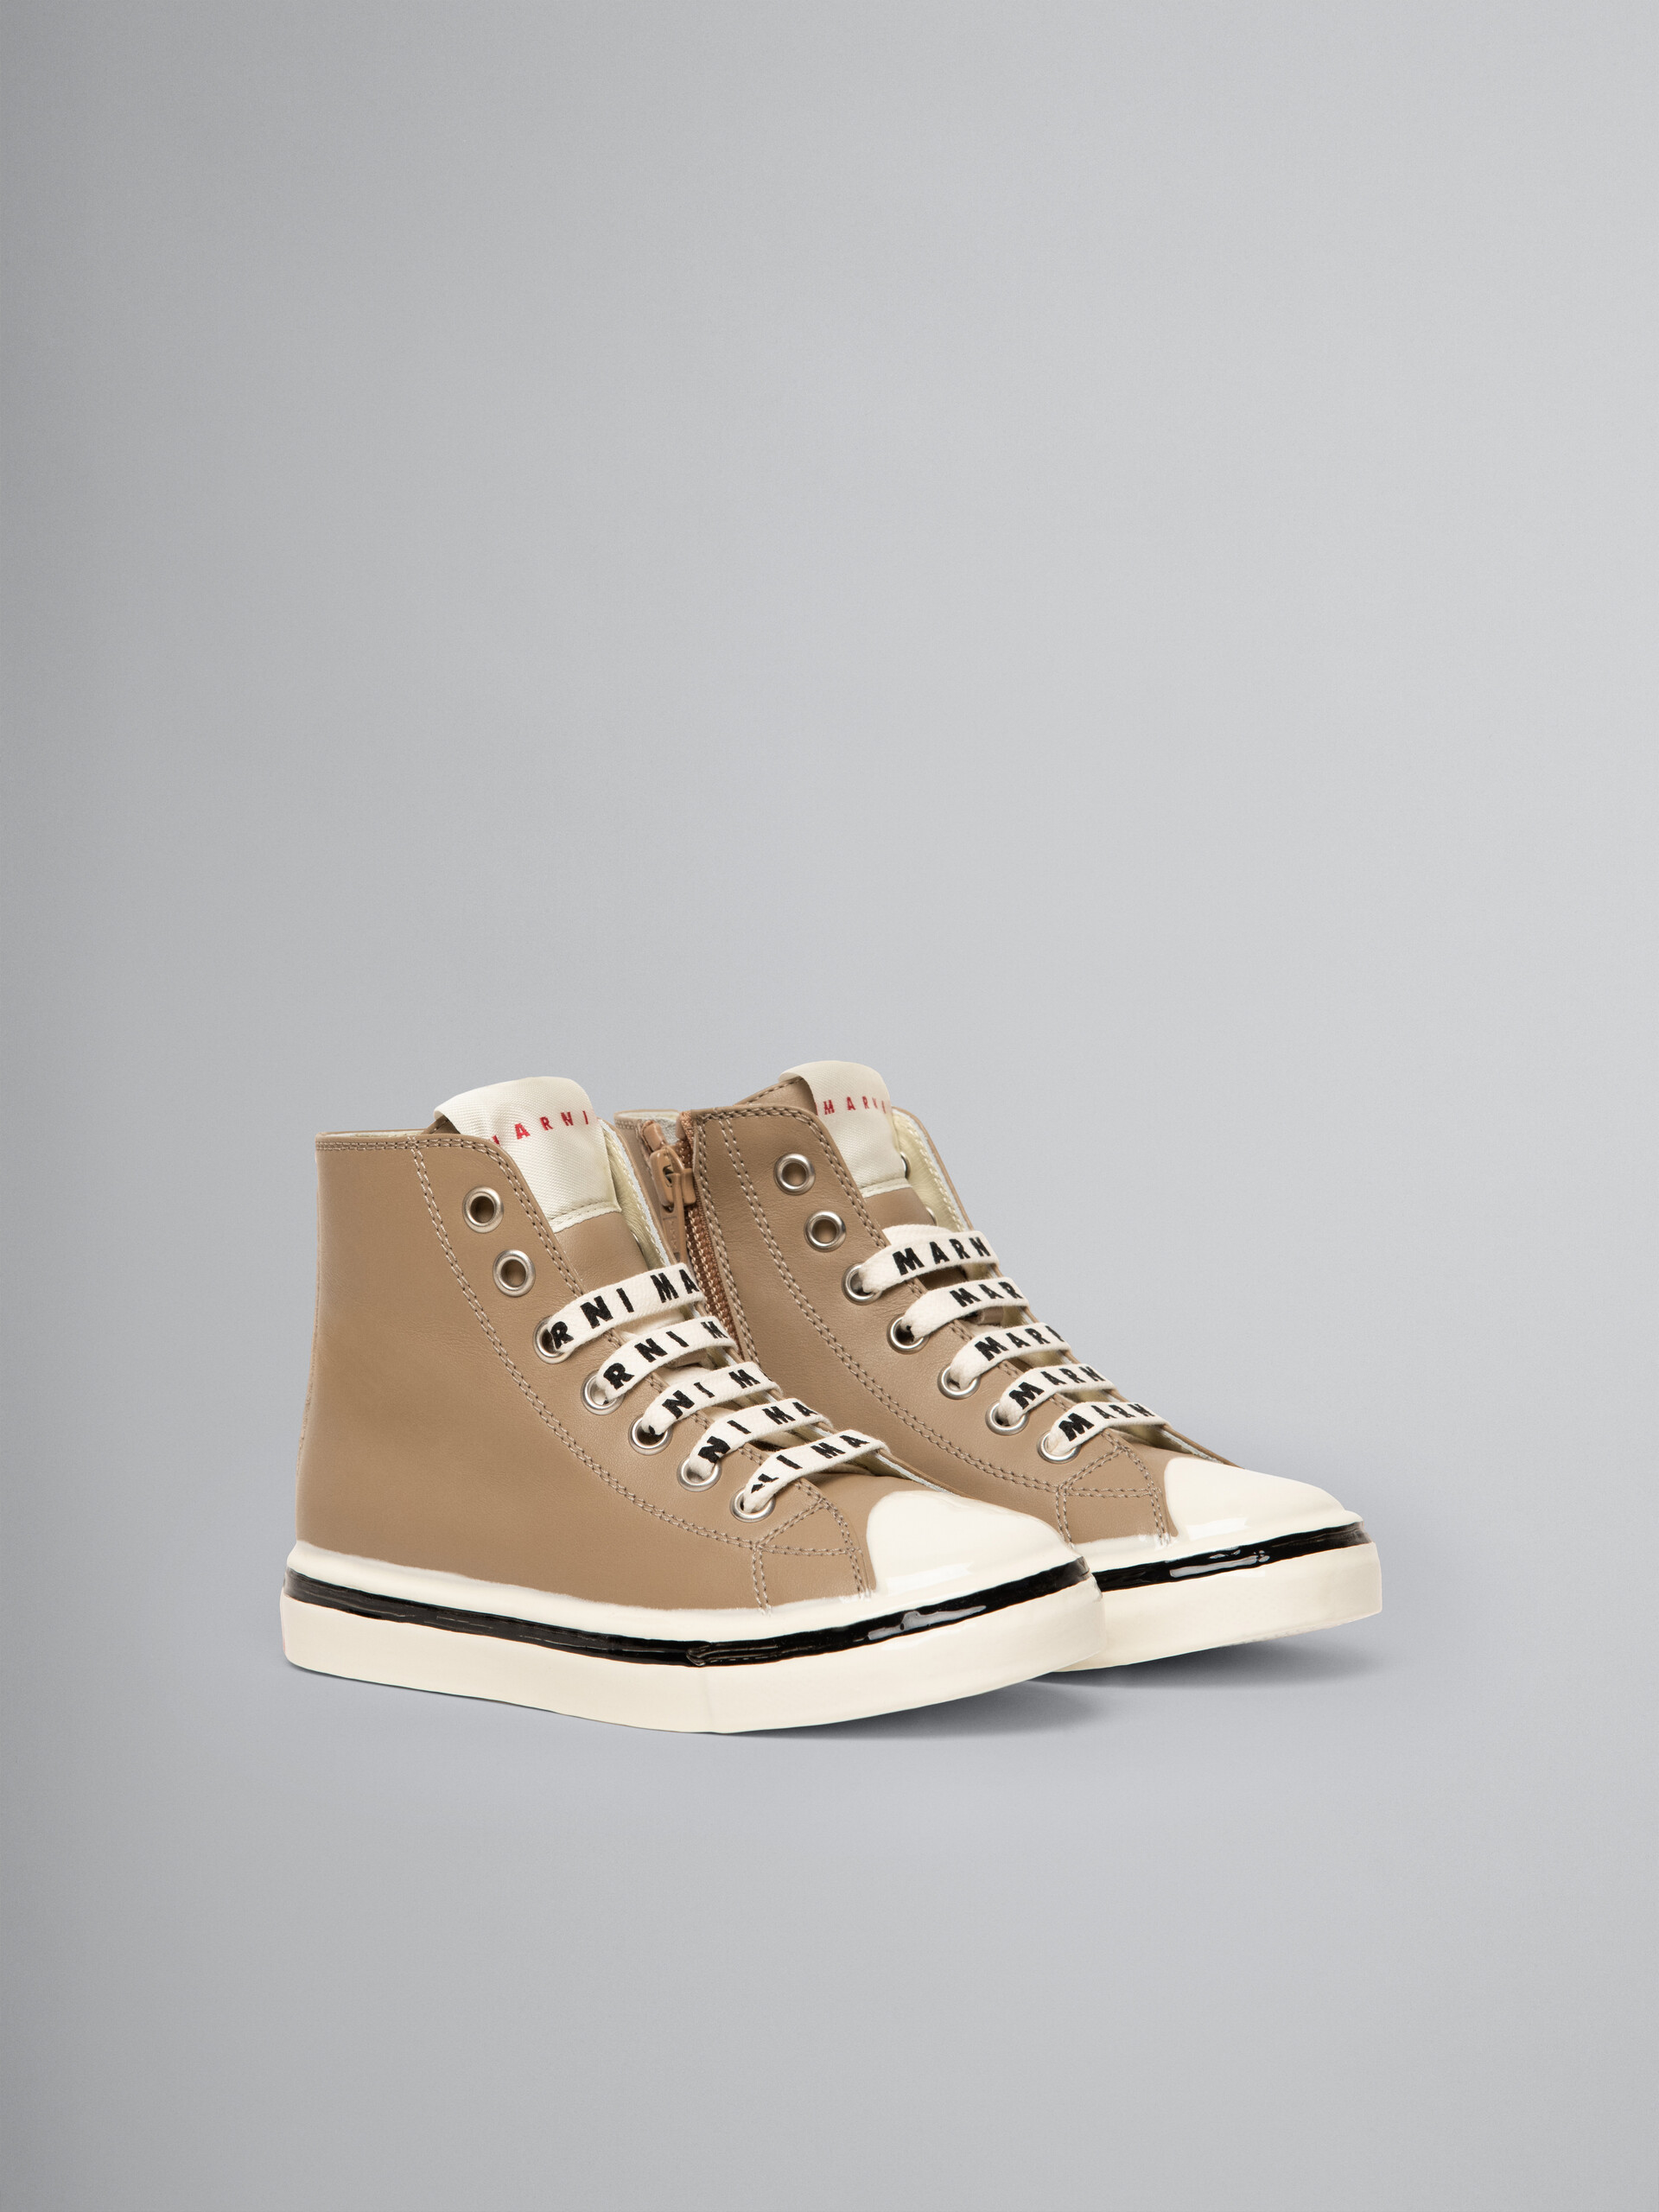 Brown leather sneaker - Other accessories - Image 2